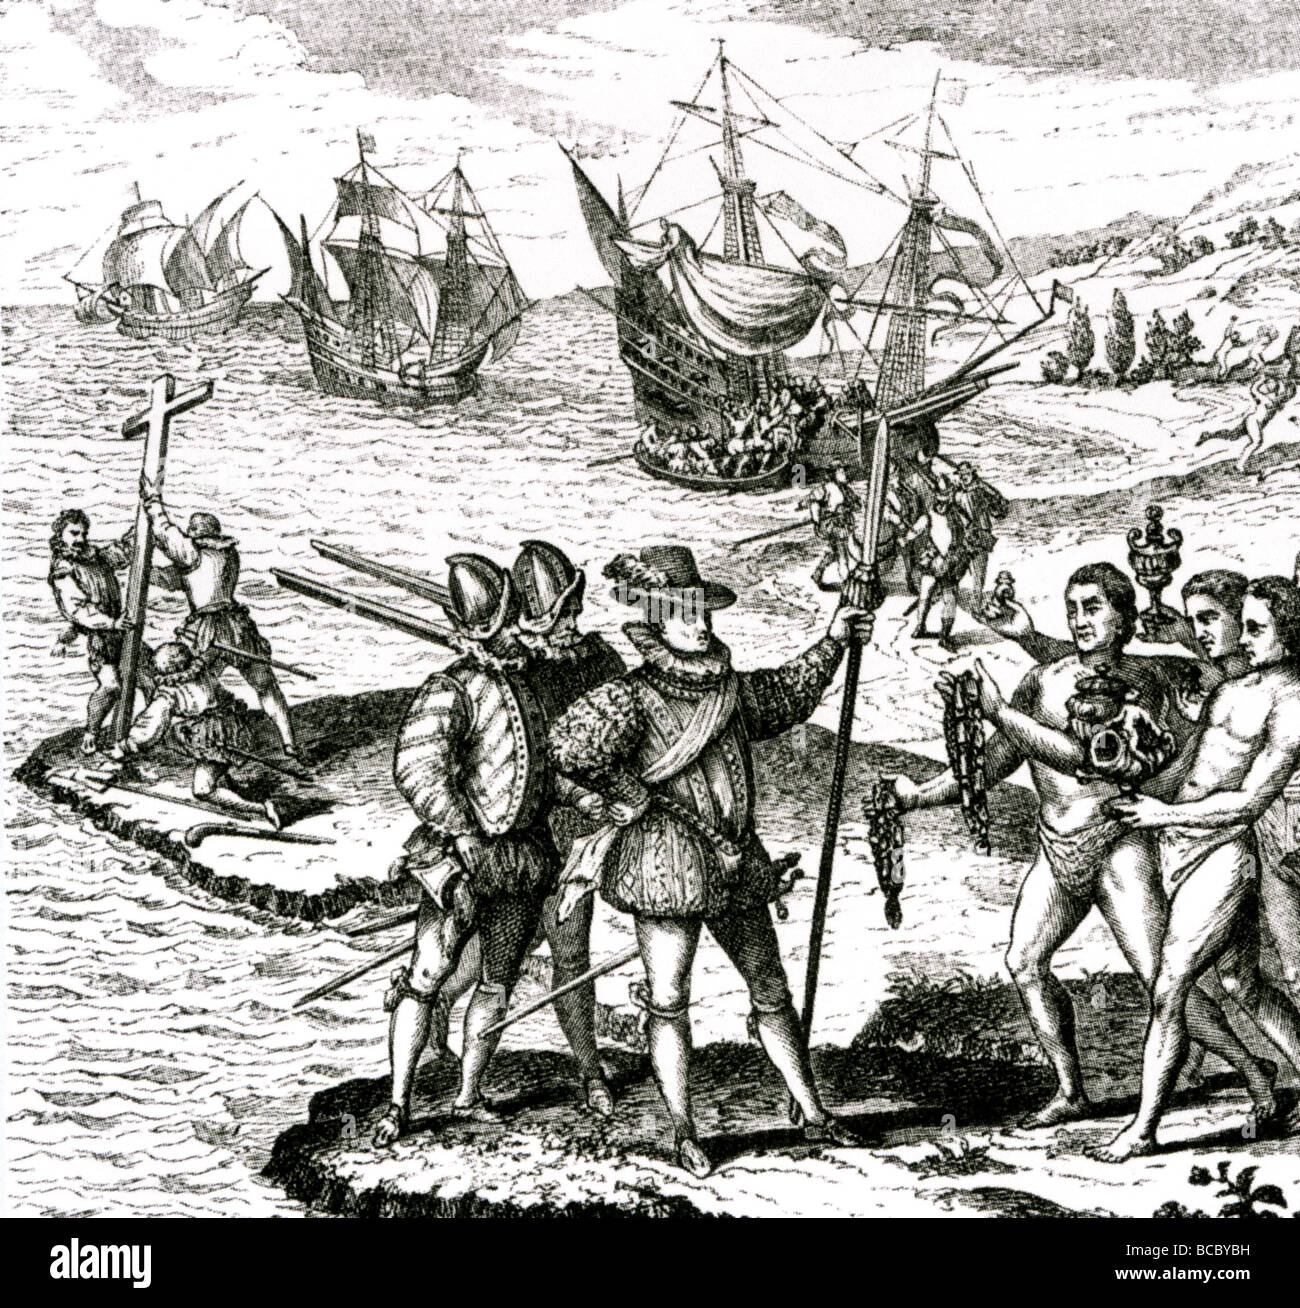 SPANISH CONQUISTADORS recieve gifts from native Indians in this contemporary engraving while soldiers raise a Cross Stock Photo